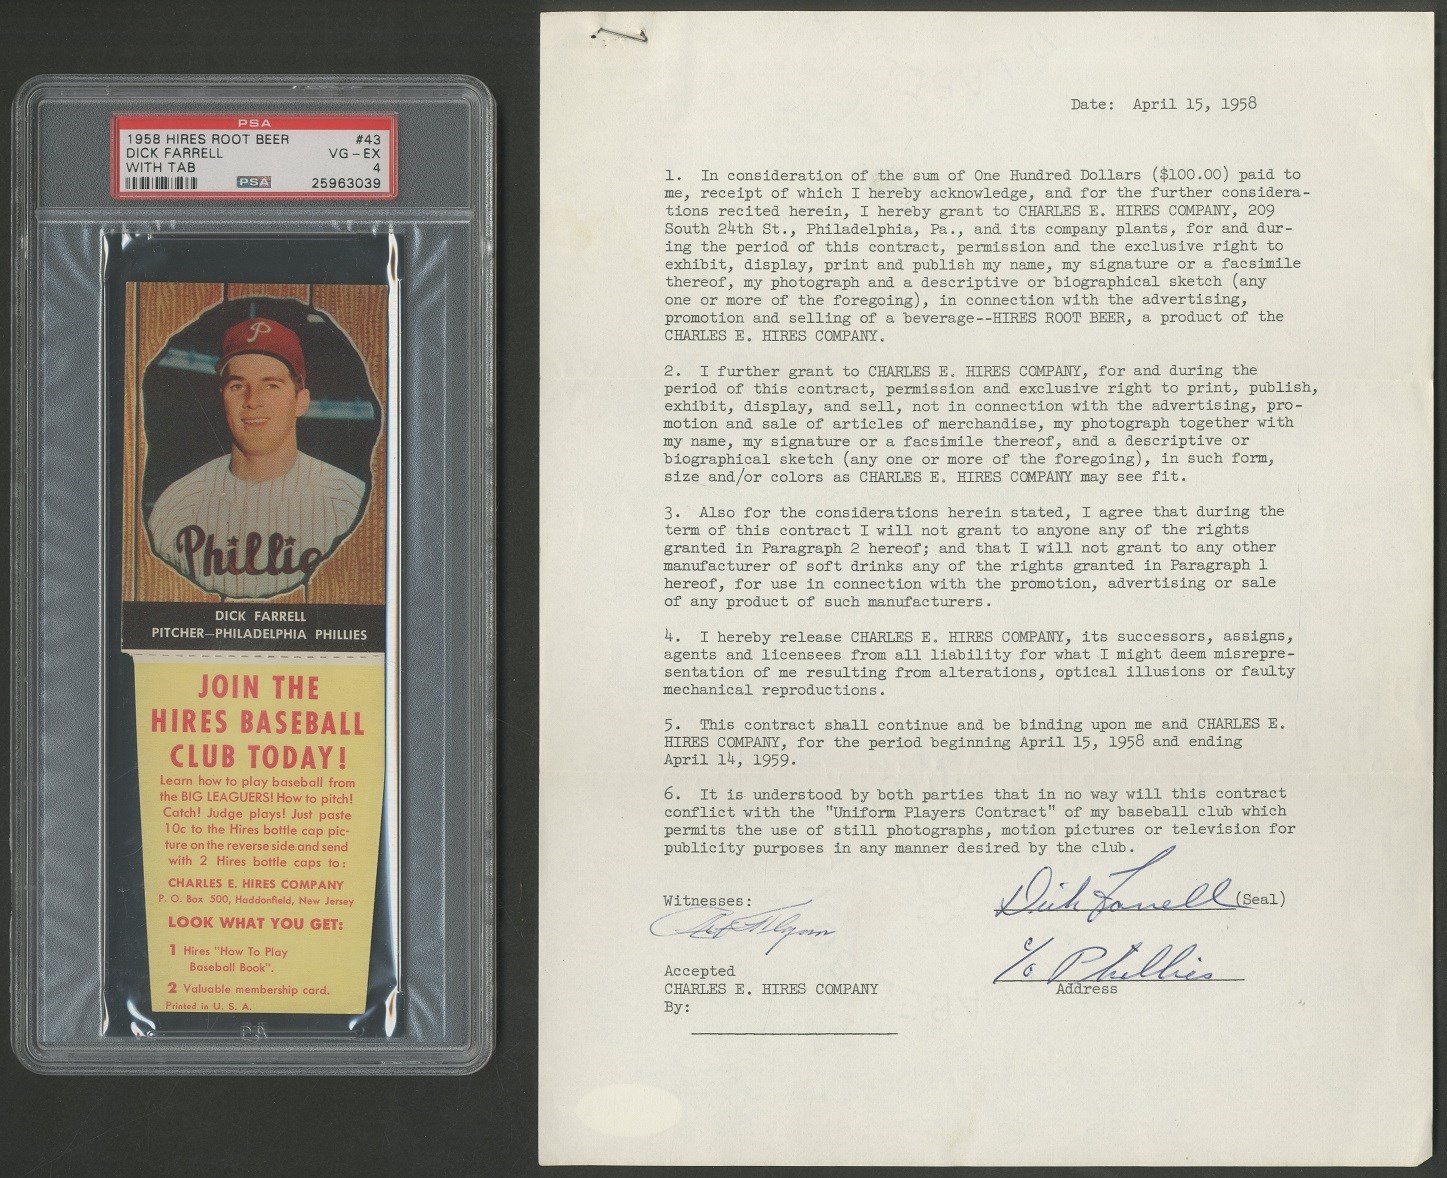 Dick Farrell Signed Contract for 1958 Hires Root Beer and PSA 4 1958 Hires Root Beer with Tab